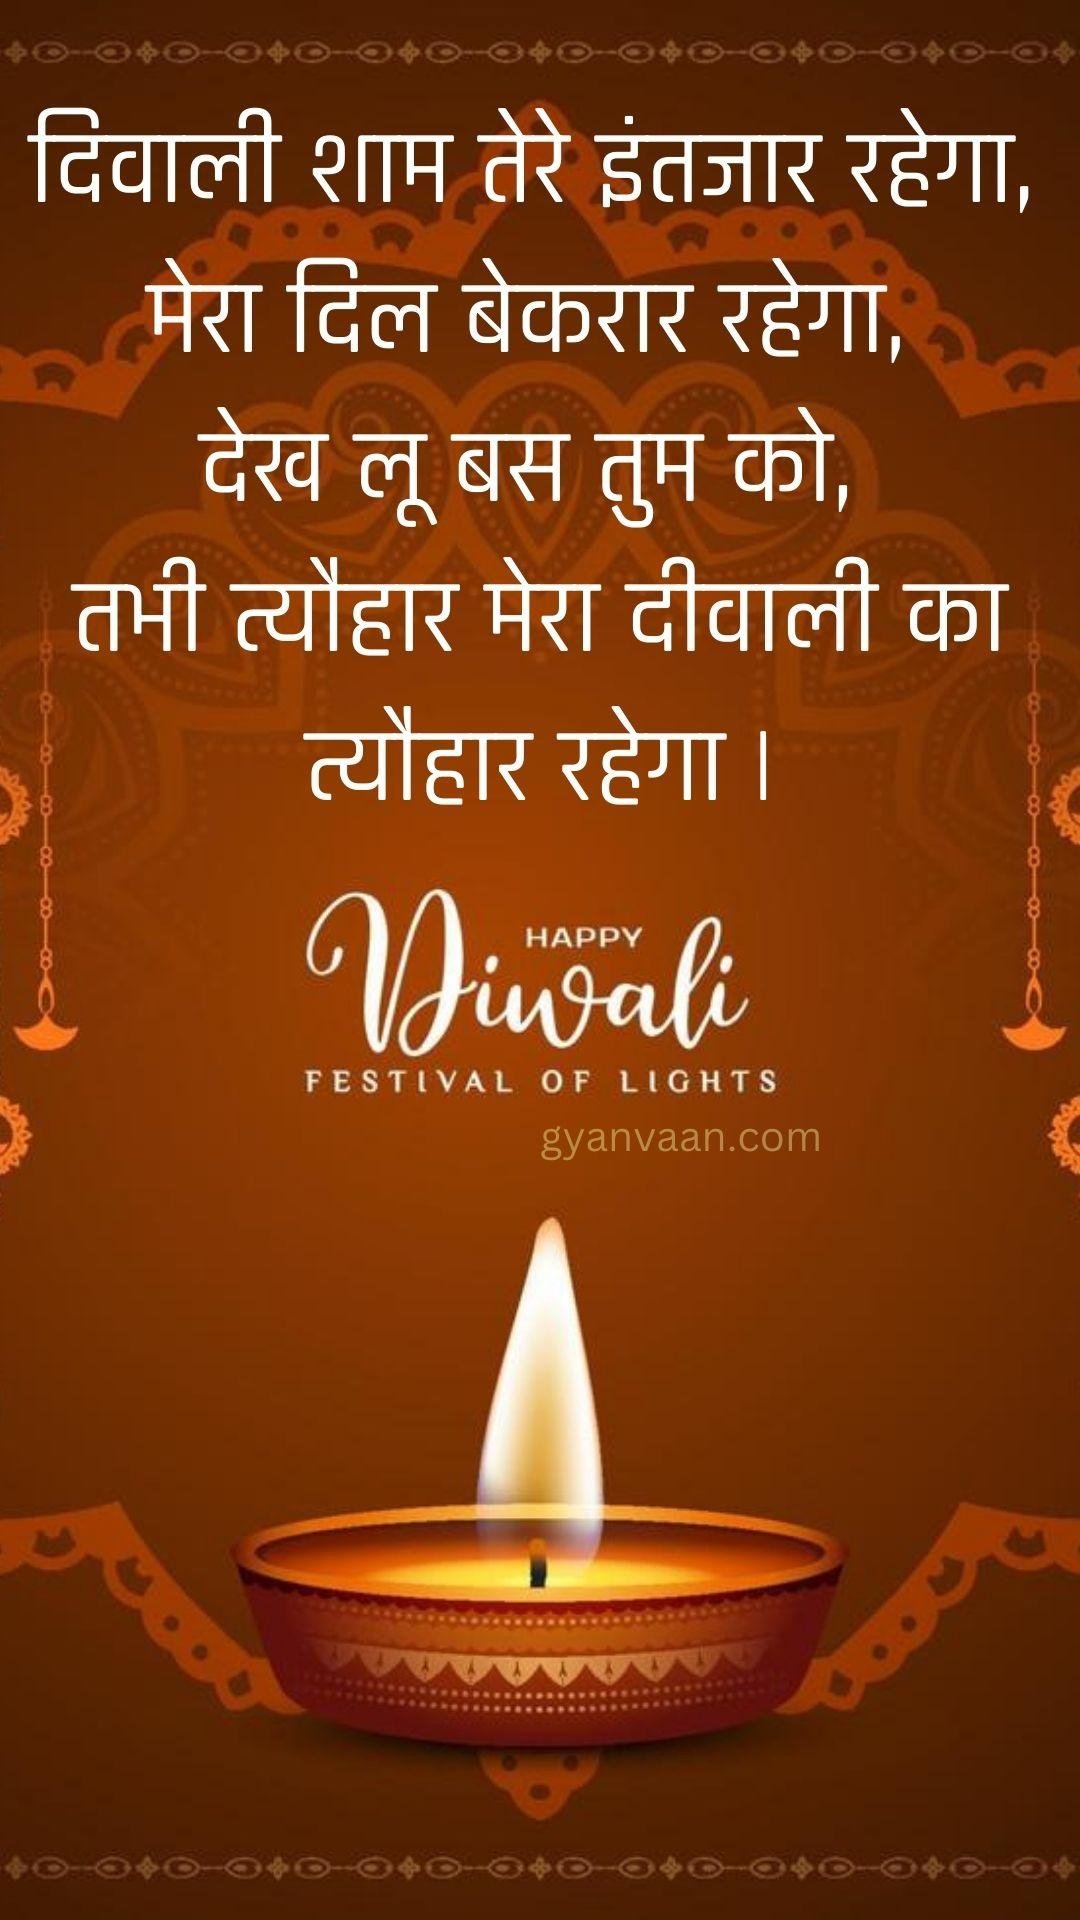 Diwali Quotes In Hindi With Wishes17 - Diwali Quotes In Hindi